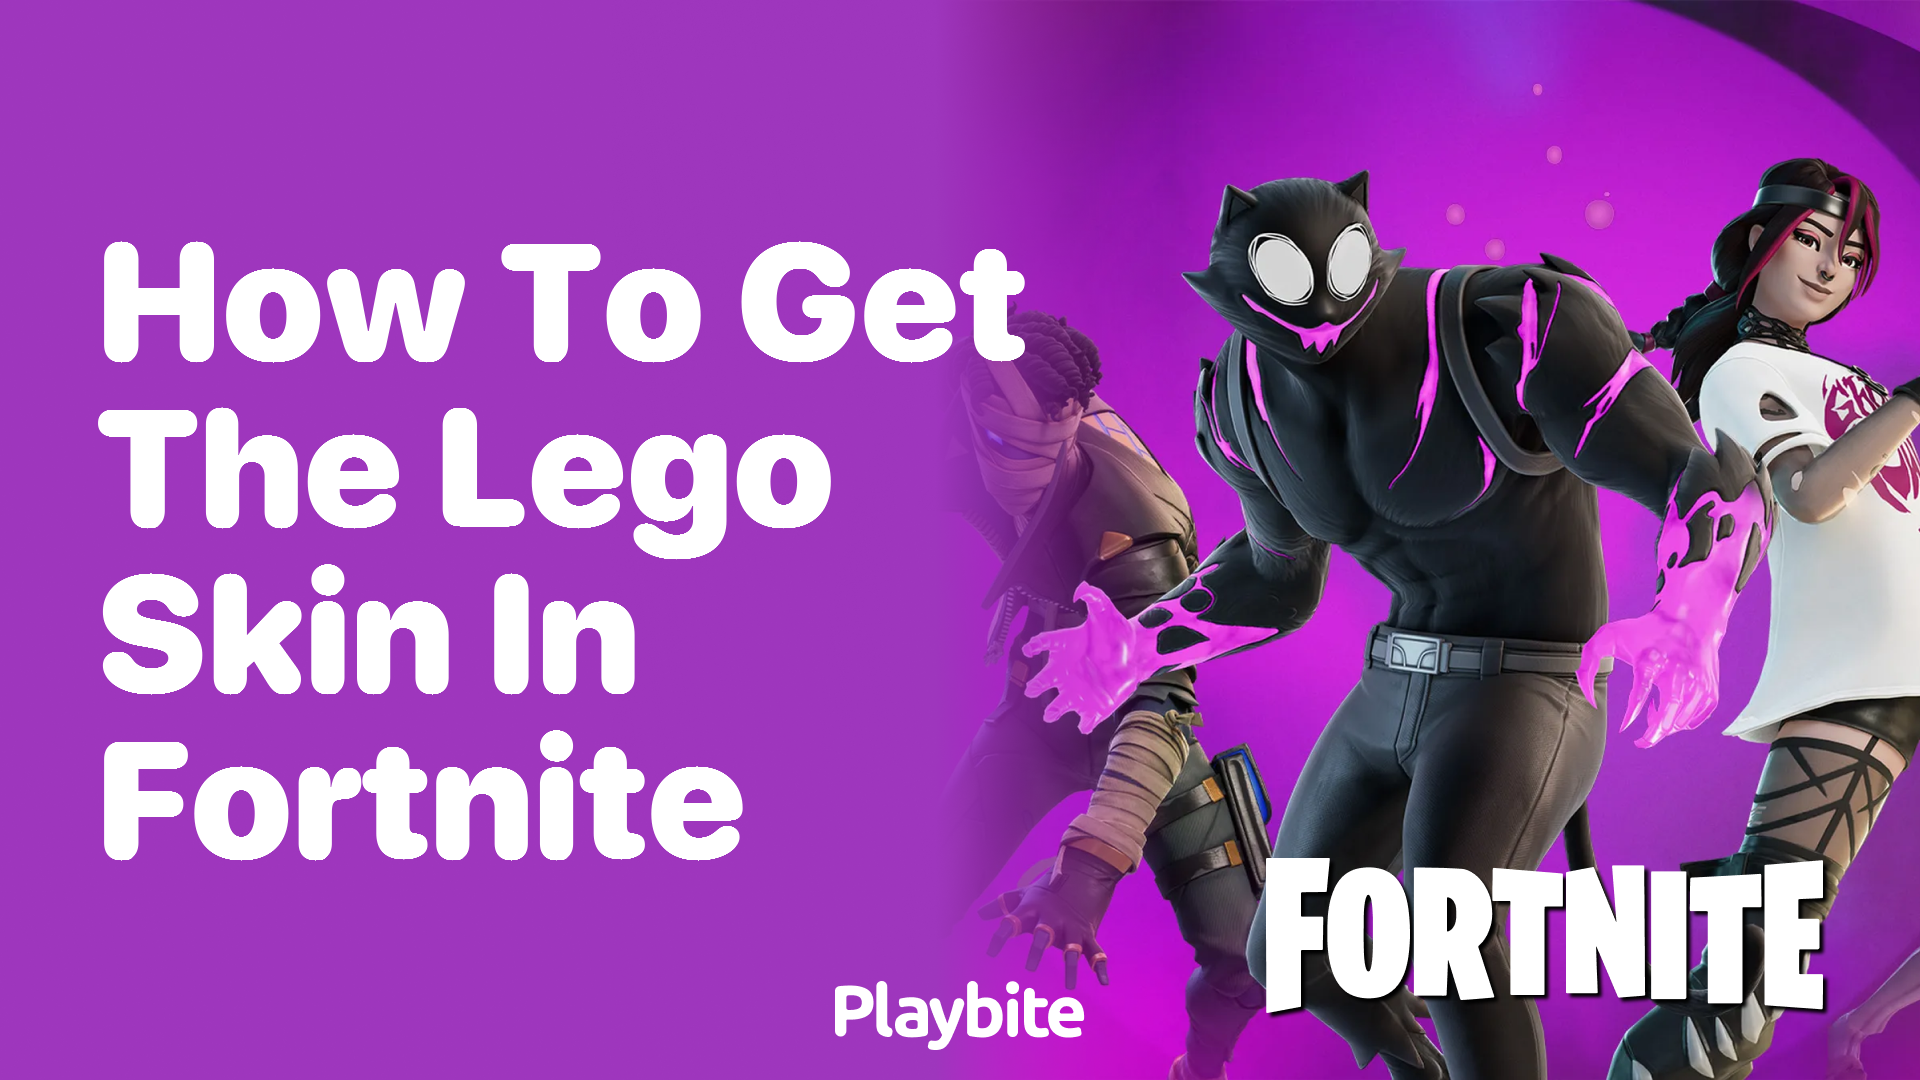 How to Get the Lego Skin in Fortnite: A Fun Guide